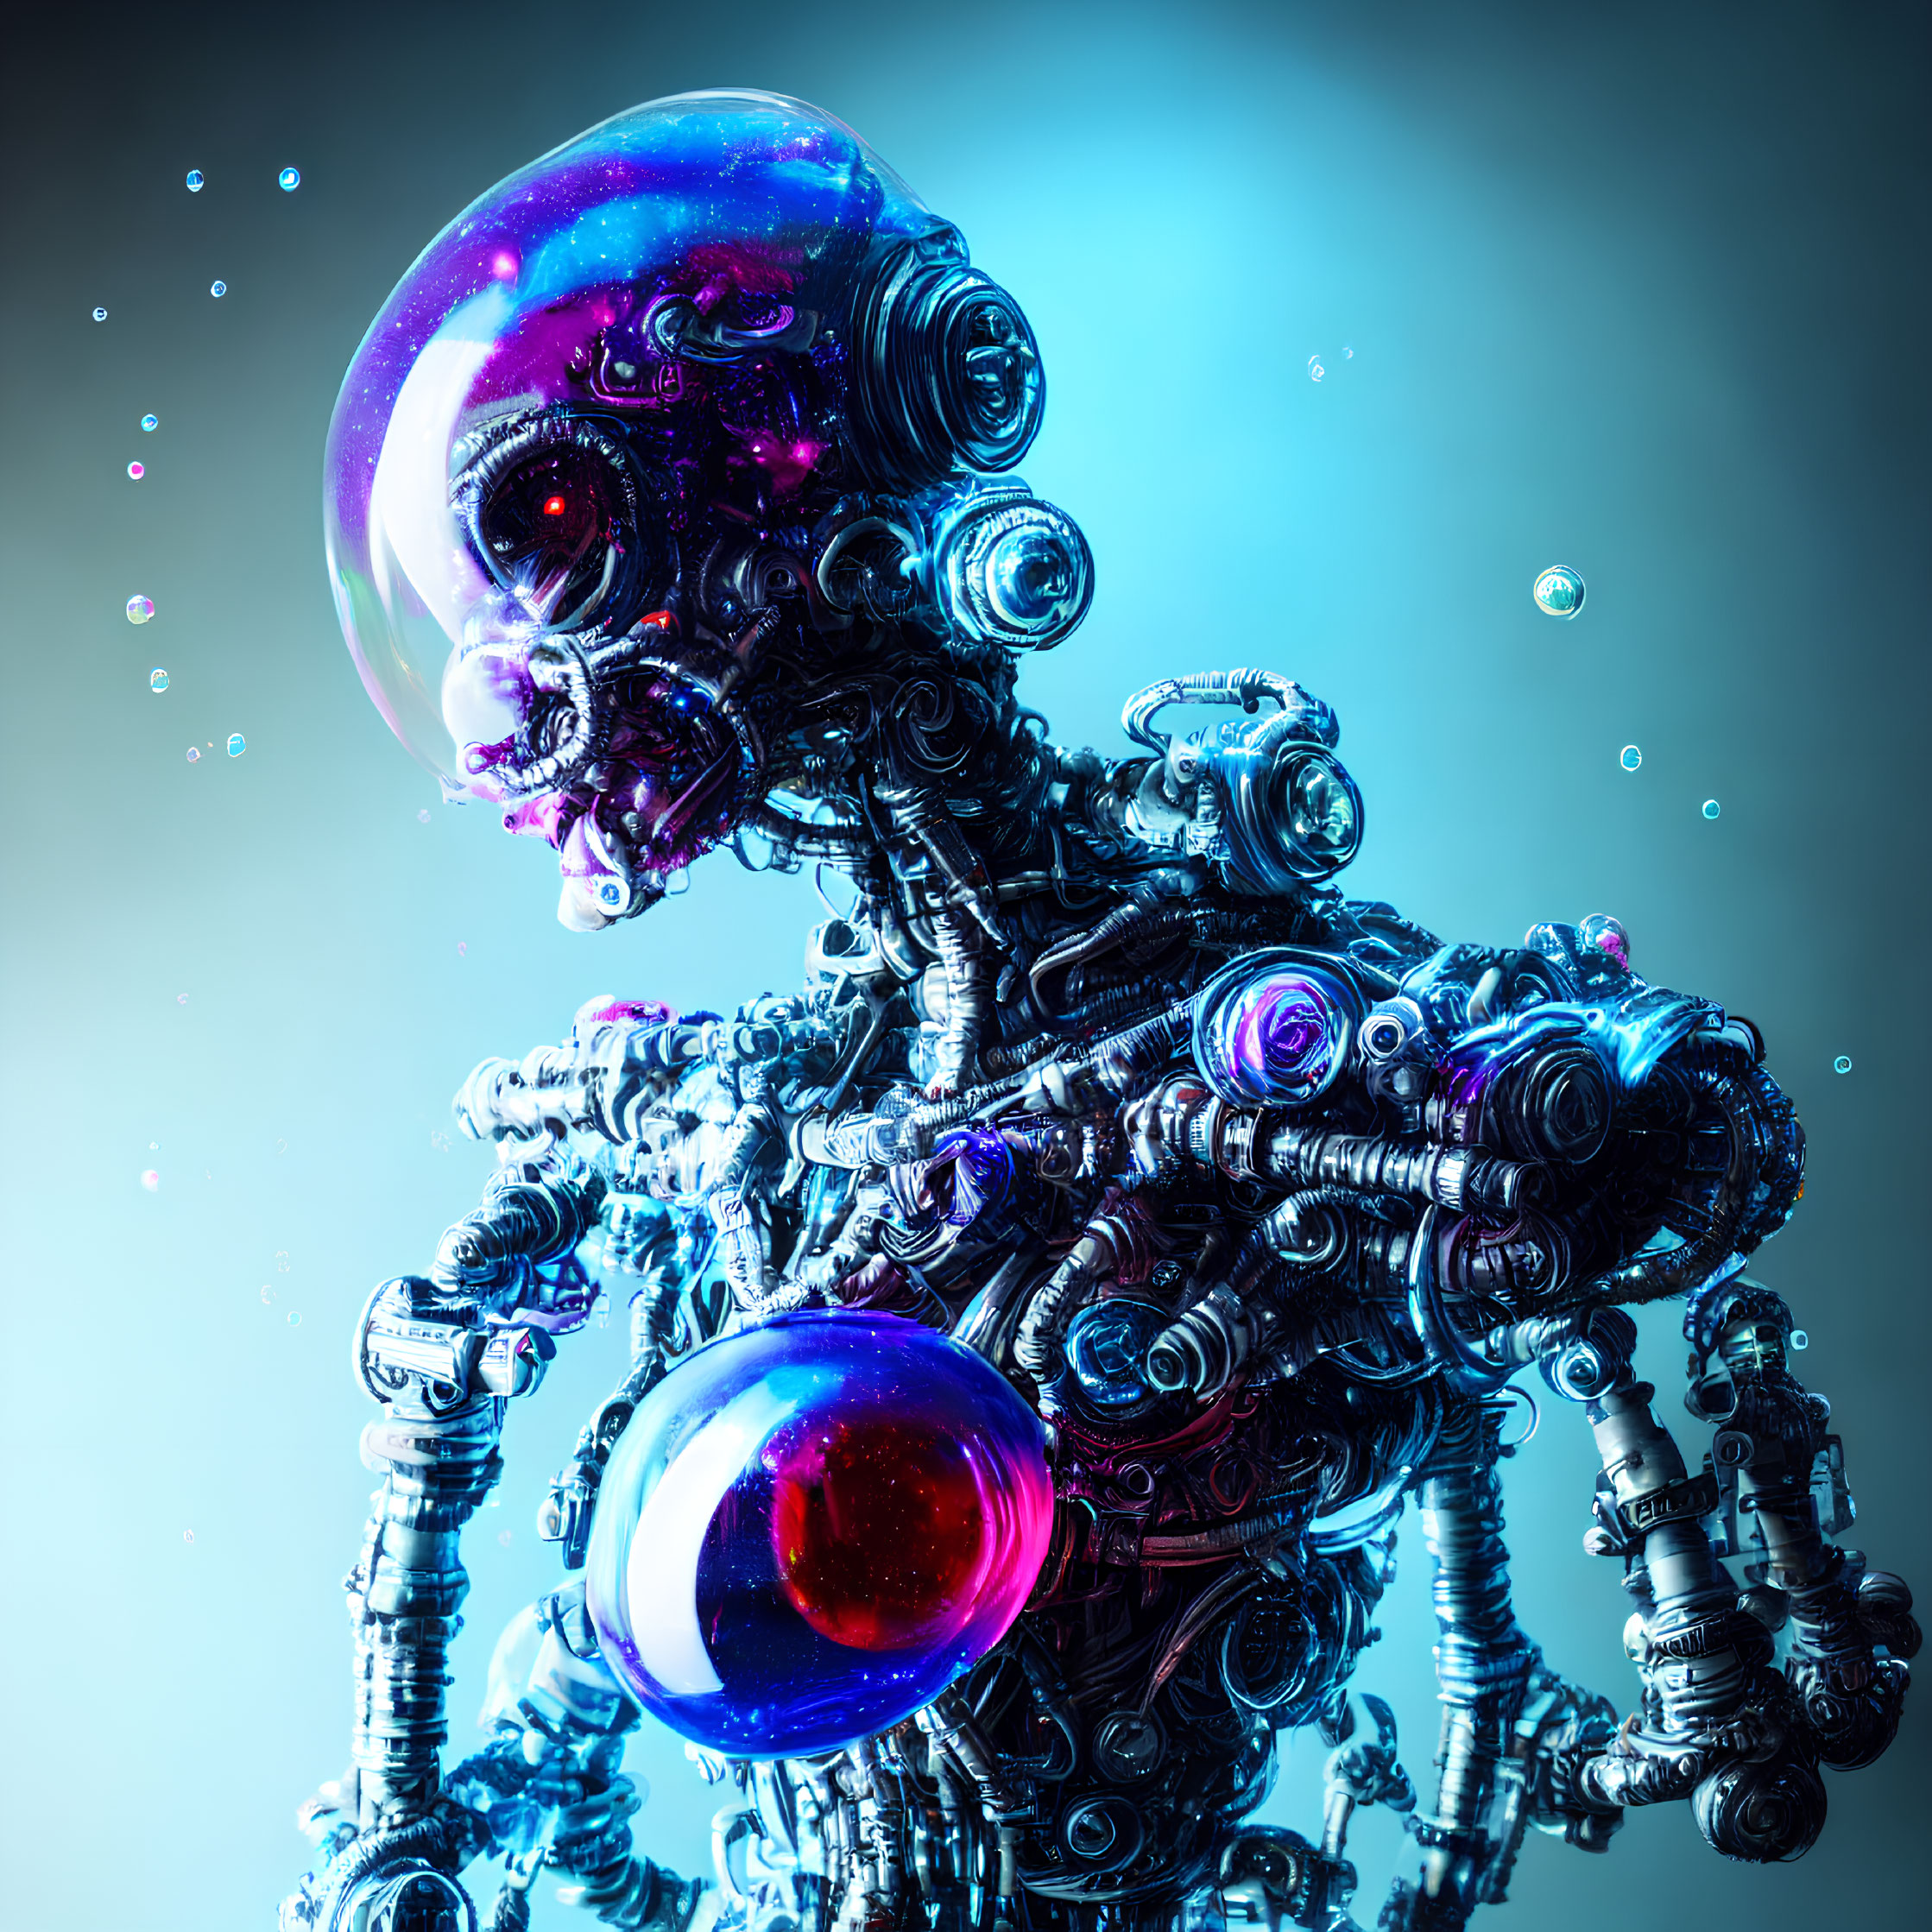 Detailed Futuristic Robot Design with Vibrant Colors and Illuminated Components